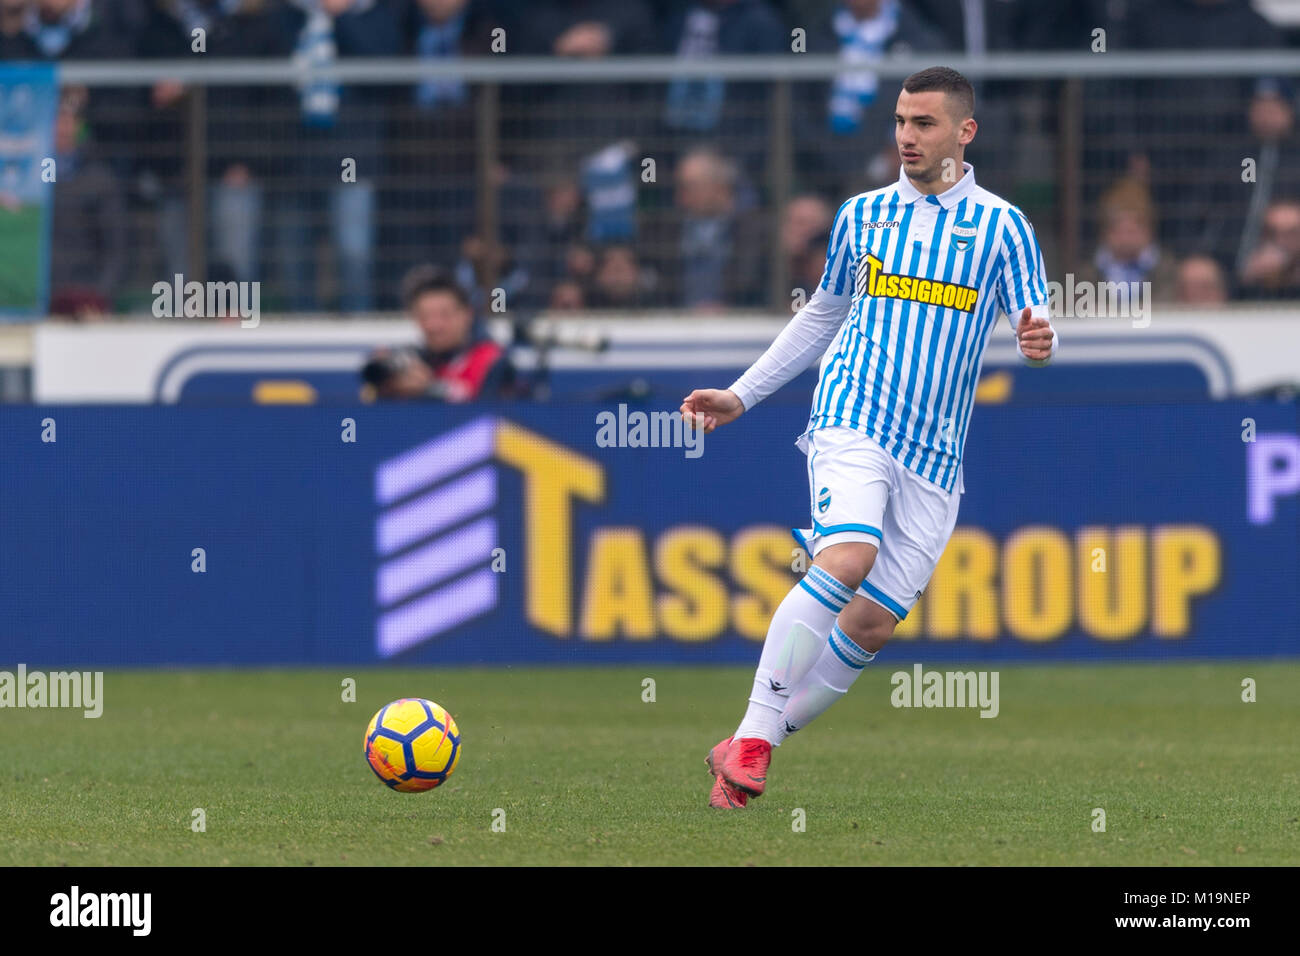 Federico Bonazzoli of Spal during the Italian "Serie A" match between Spal  1-1 Inter FC